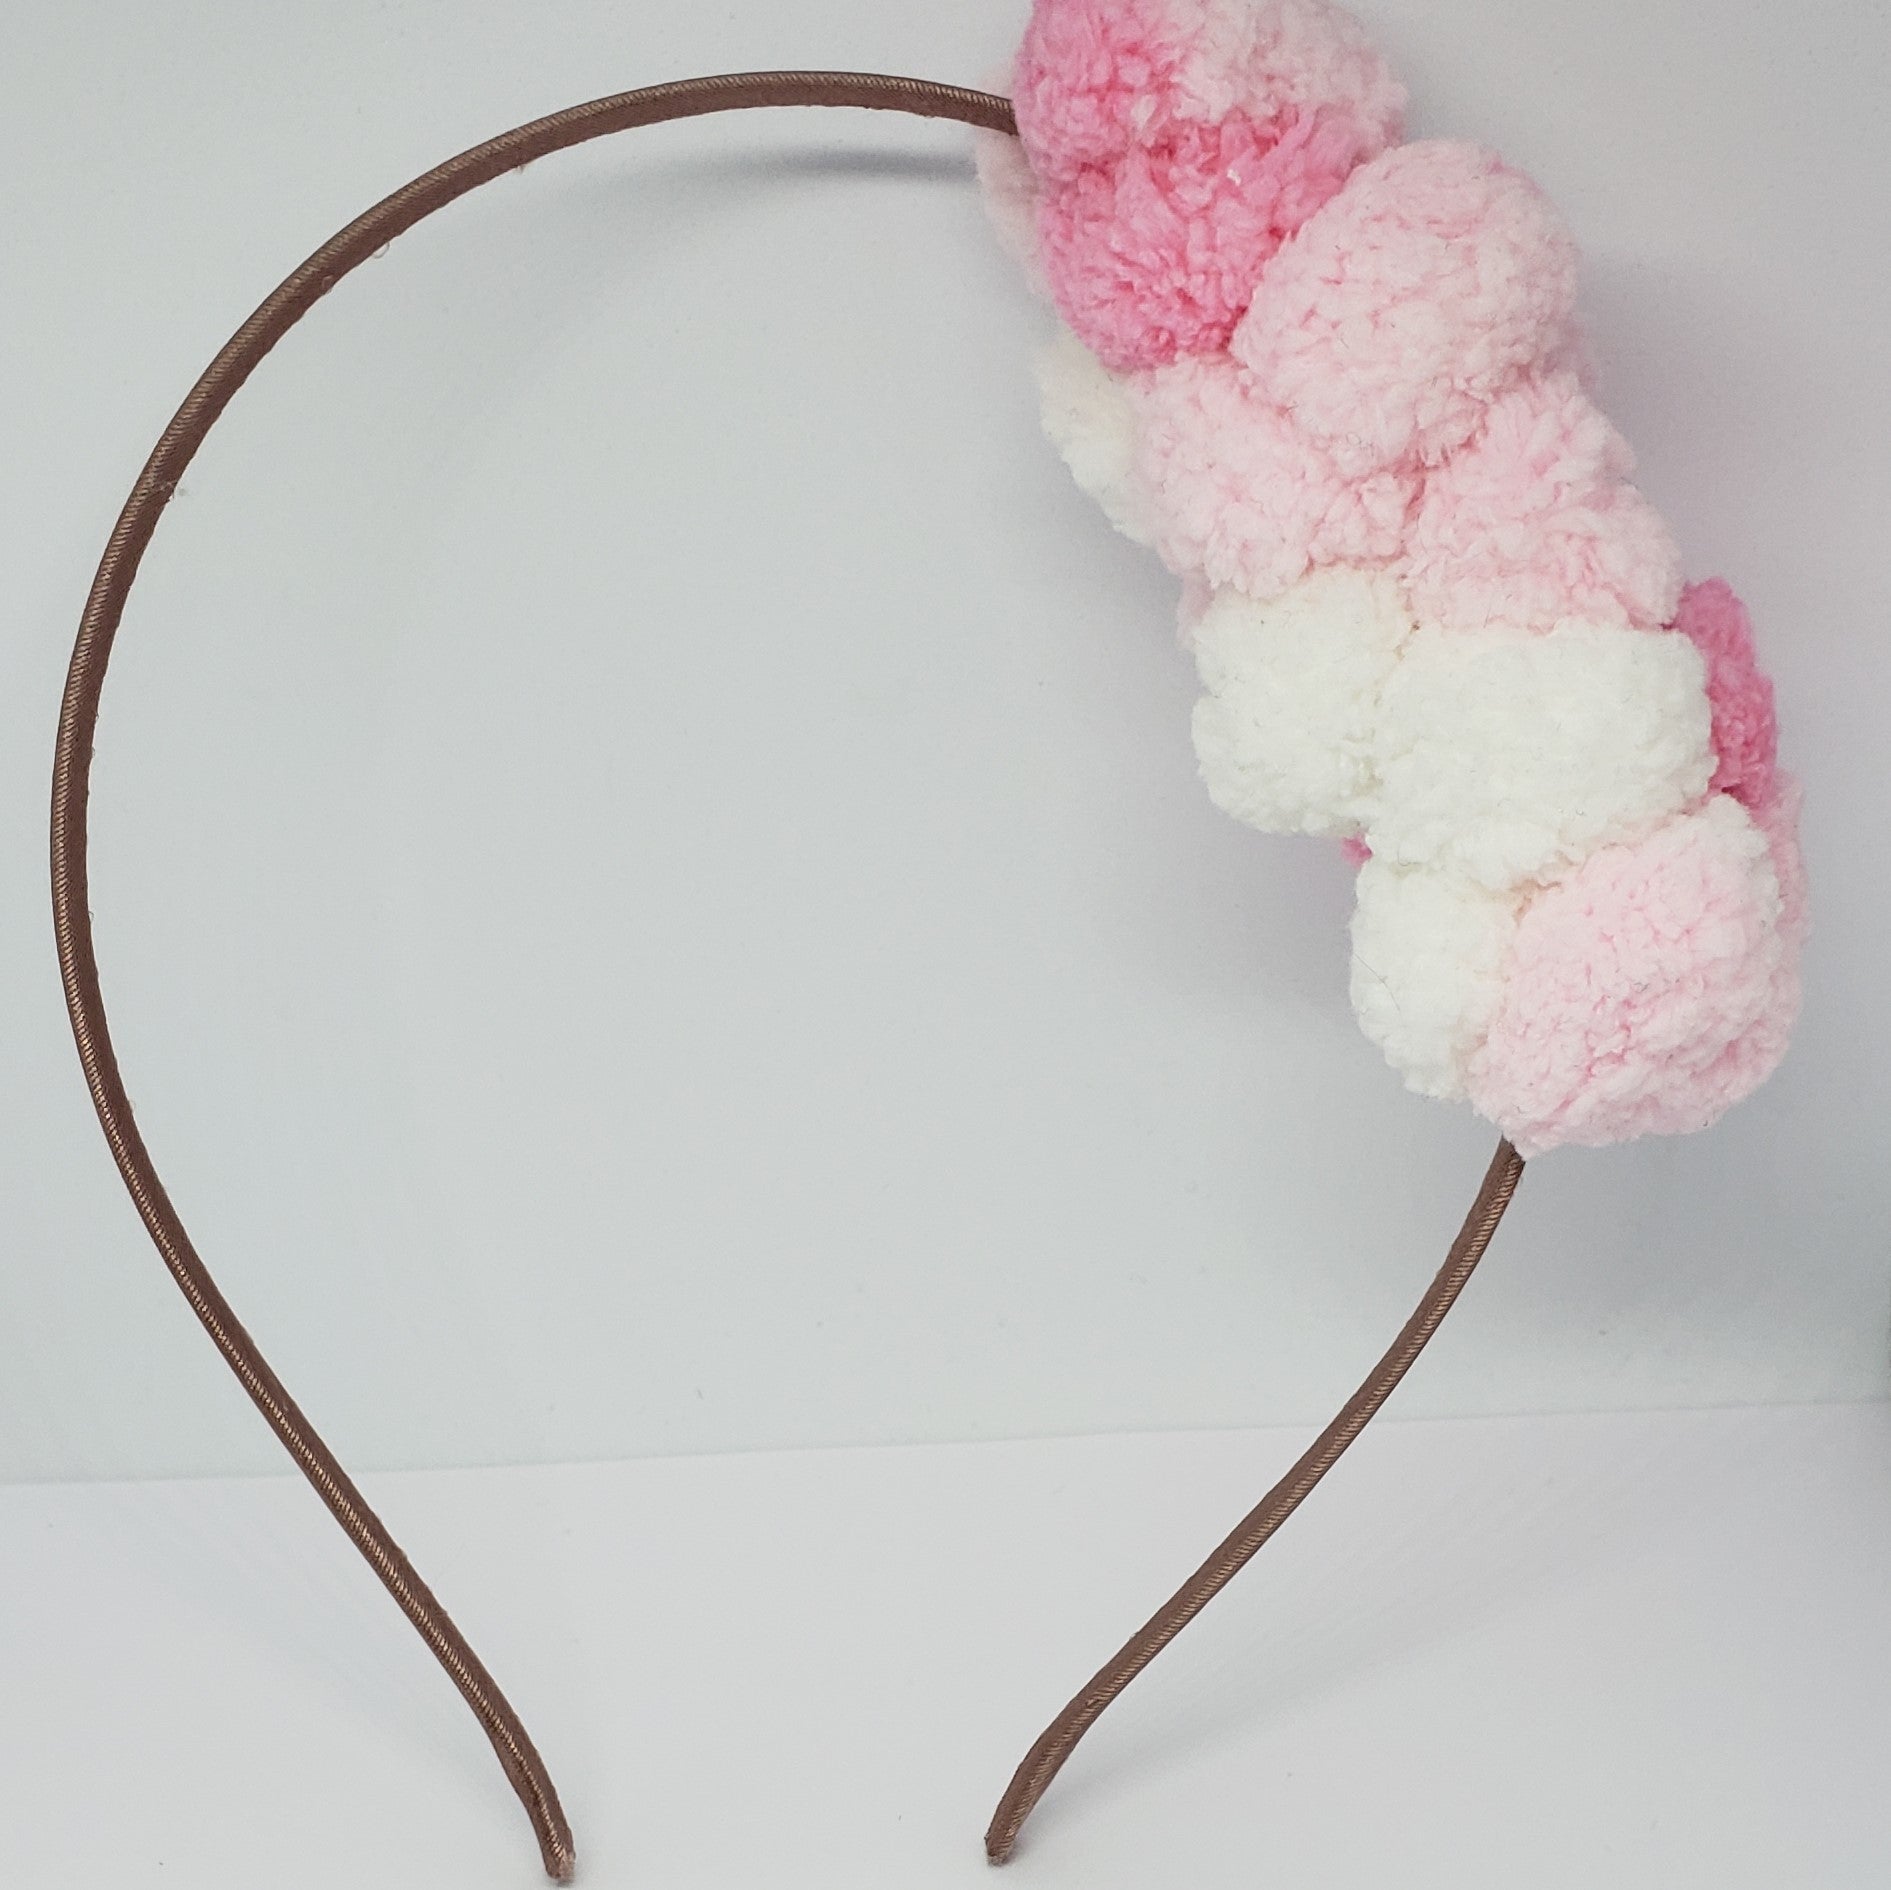 Kaelyn Cotton Candy Explosion Headband in Pink & White - Houzz of DVA Boutique